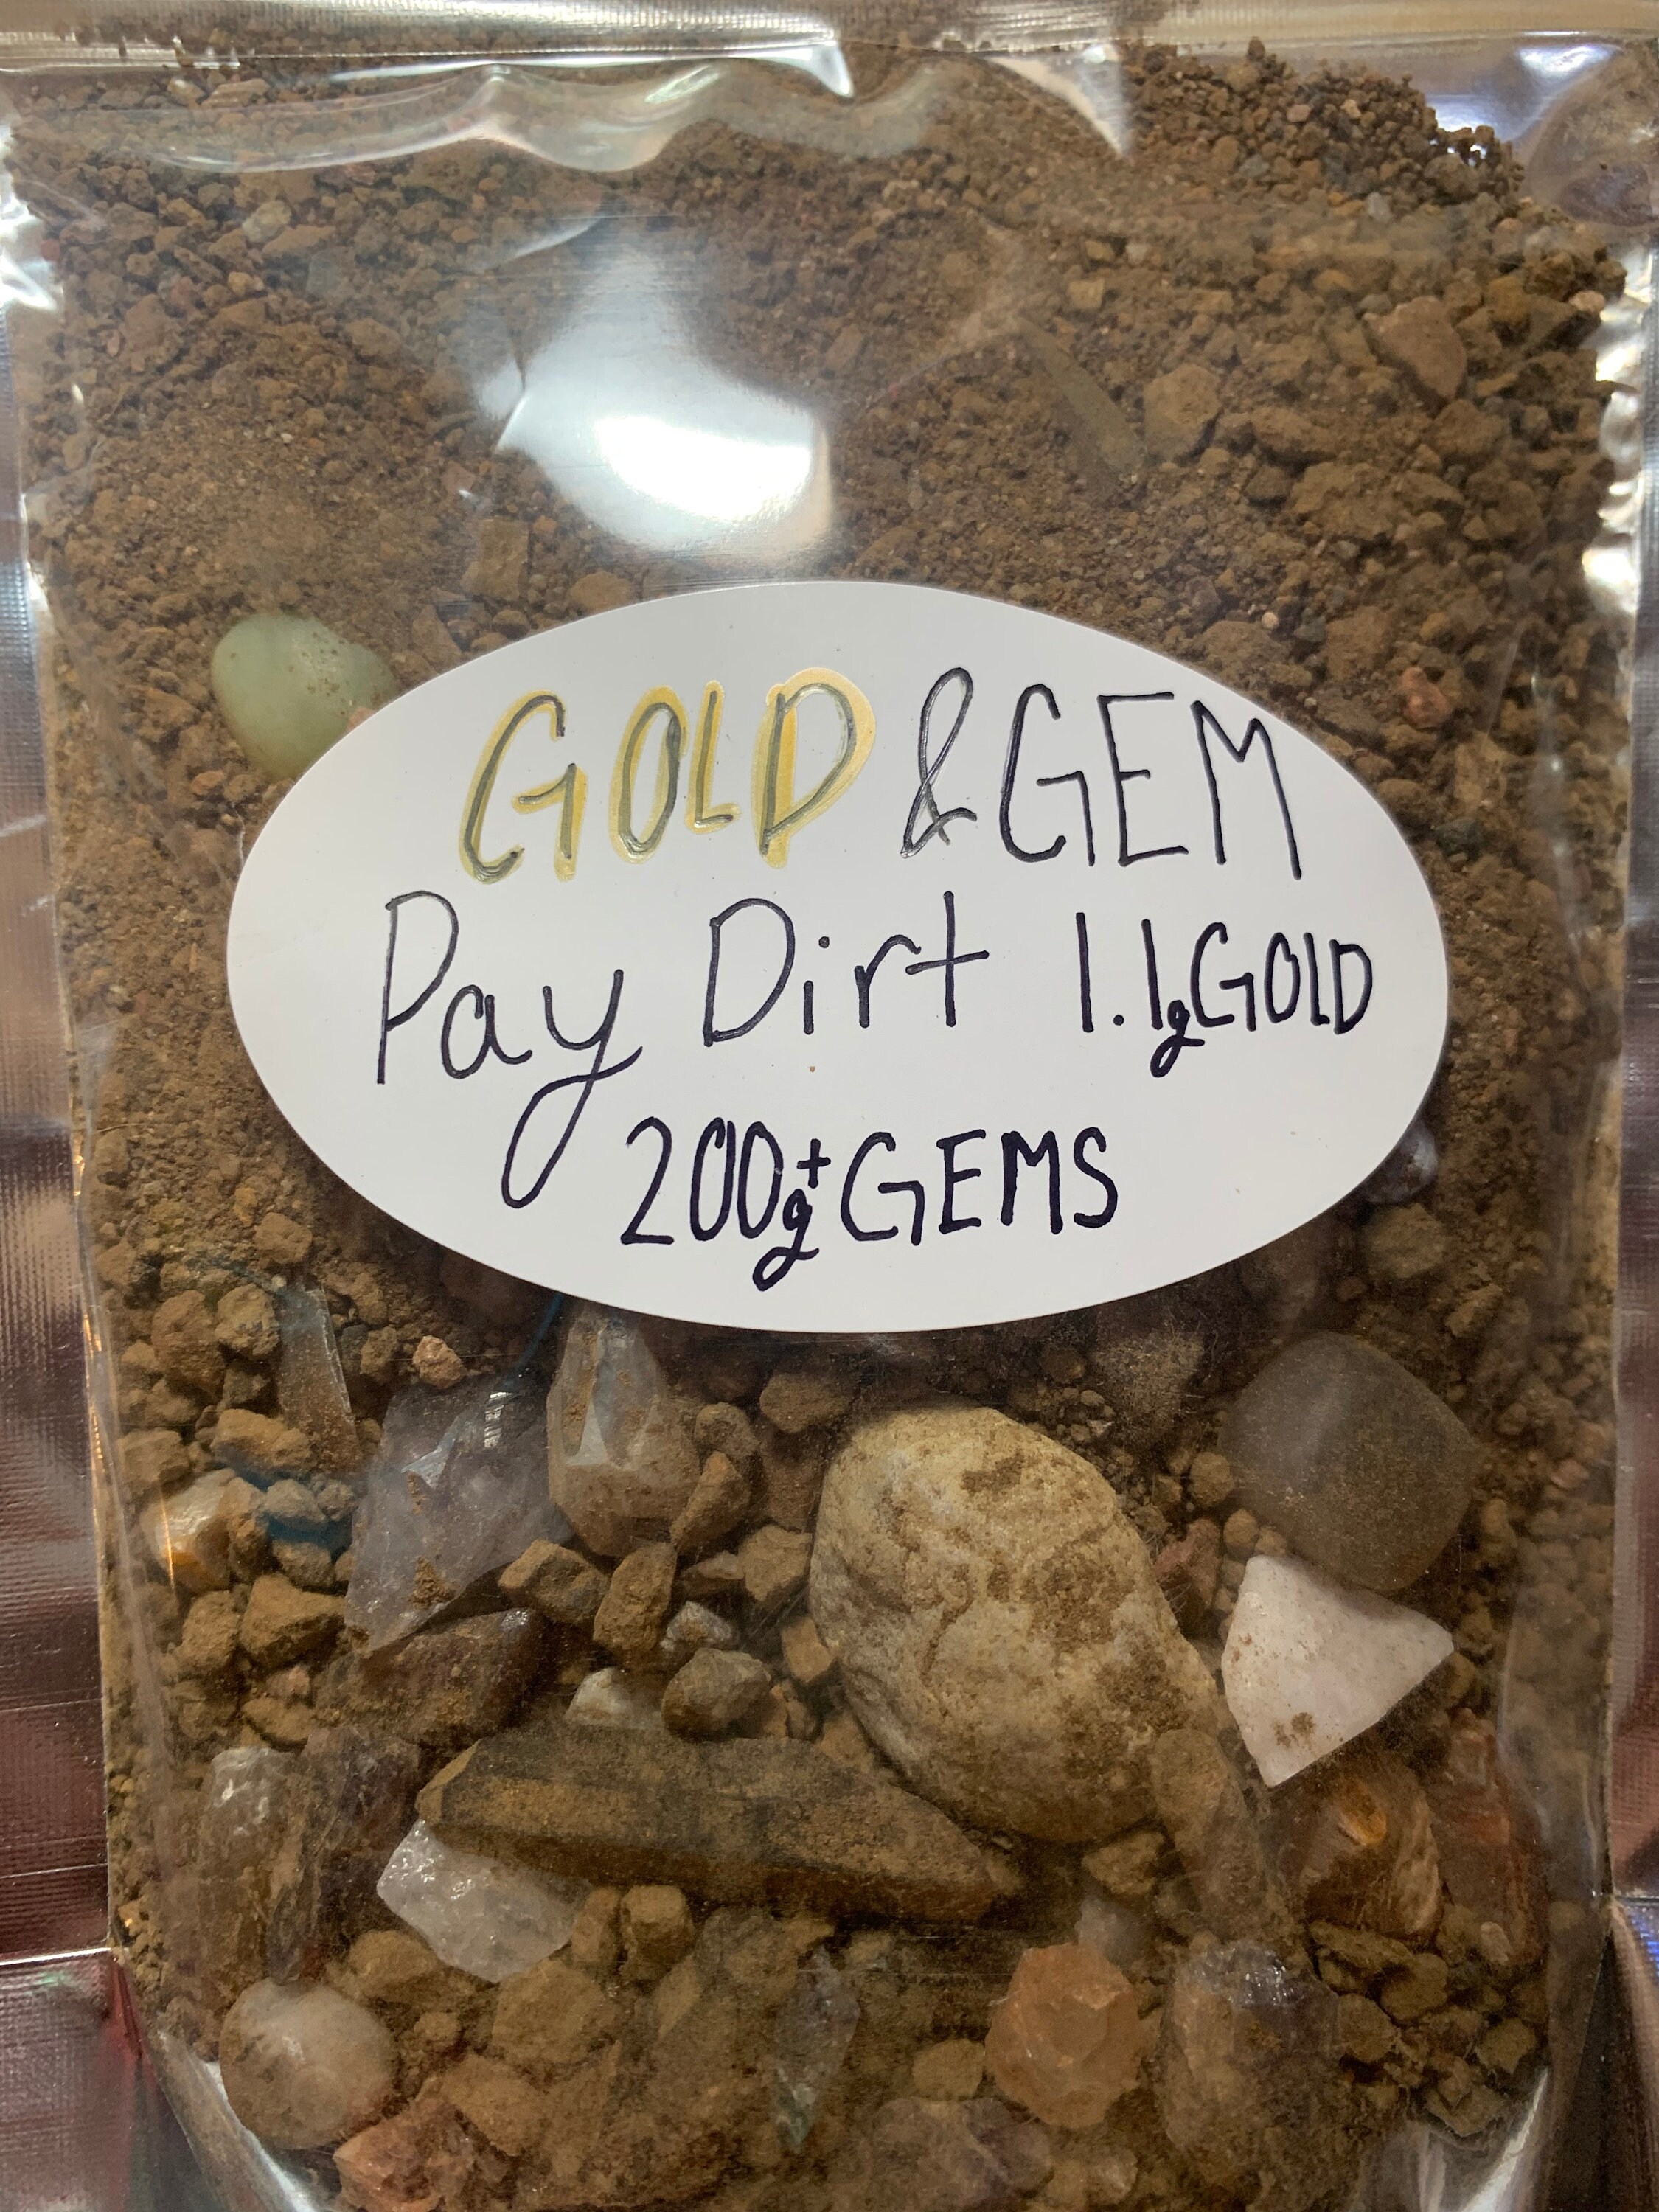 Special Gold Nugget PAYDIRT' Gold Panning Pay Dirt Bag Gold